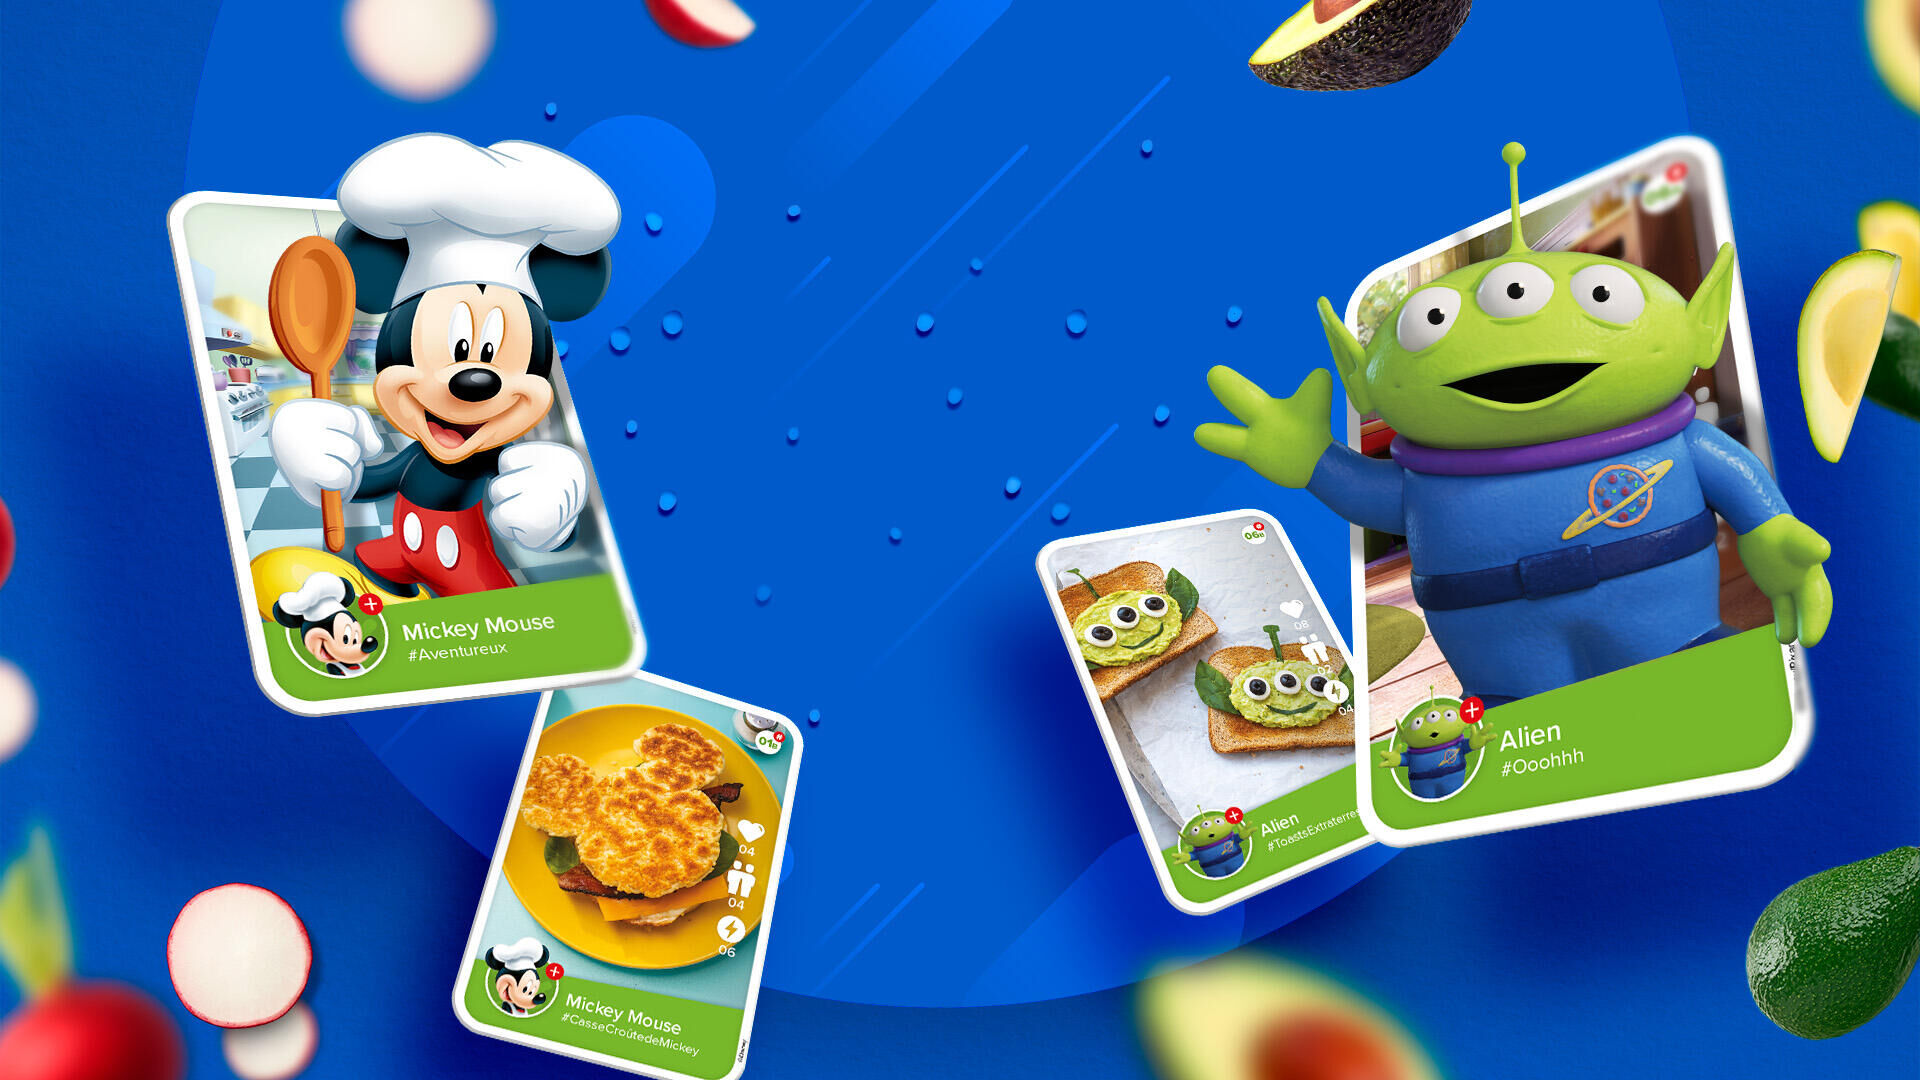 Make every mealtime magical with Disney & Carrefour